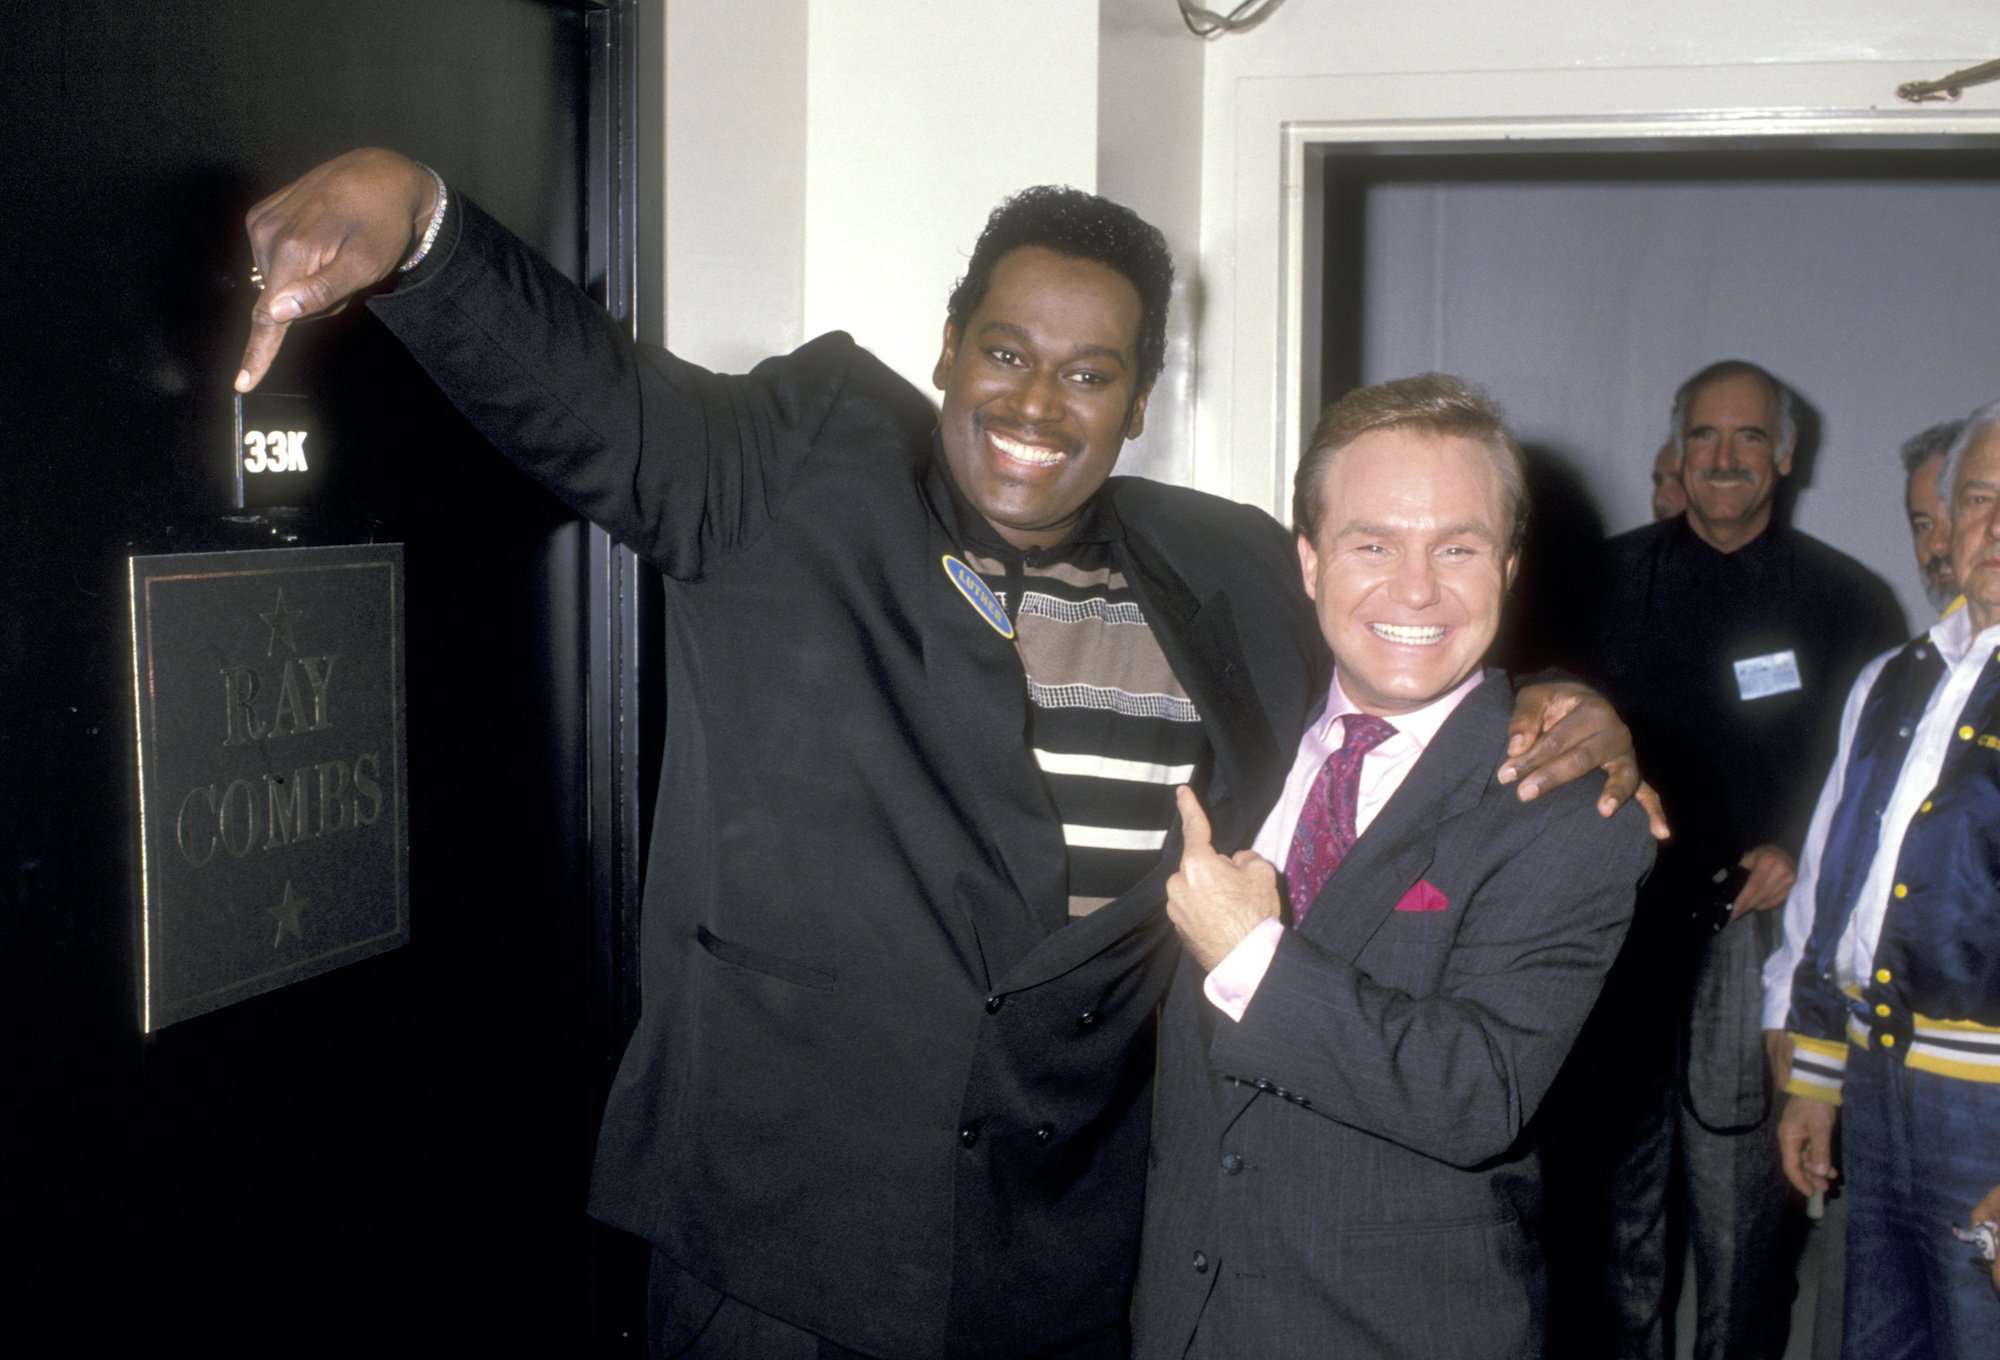 Singer Luther Vandross and game show host Ray Combs backstage at the Taping of 'Family Feud'